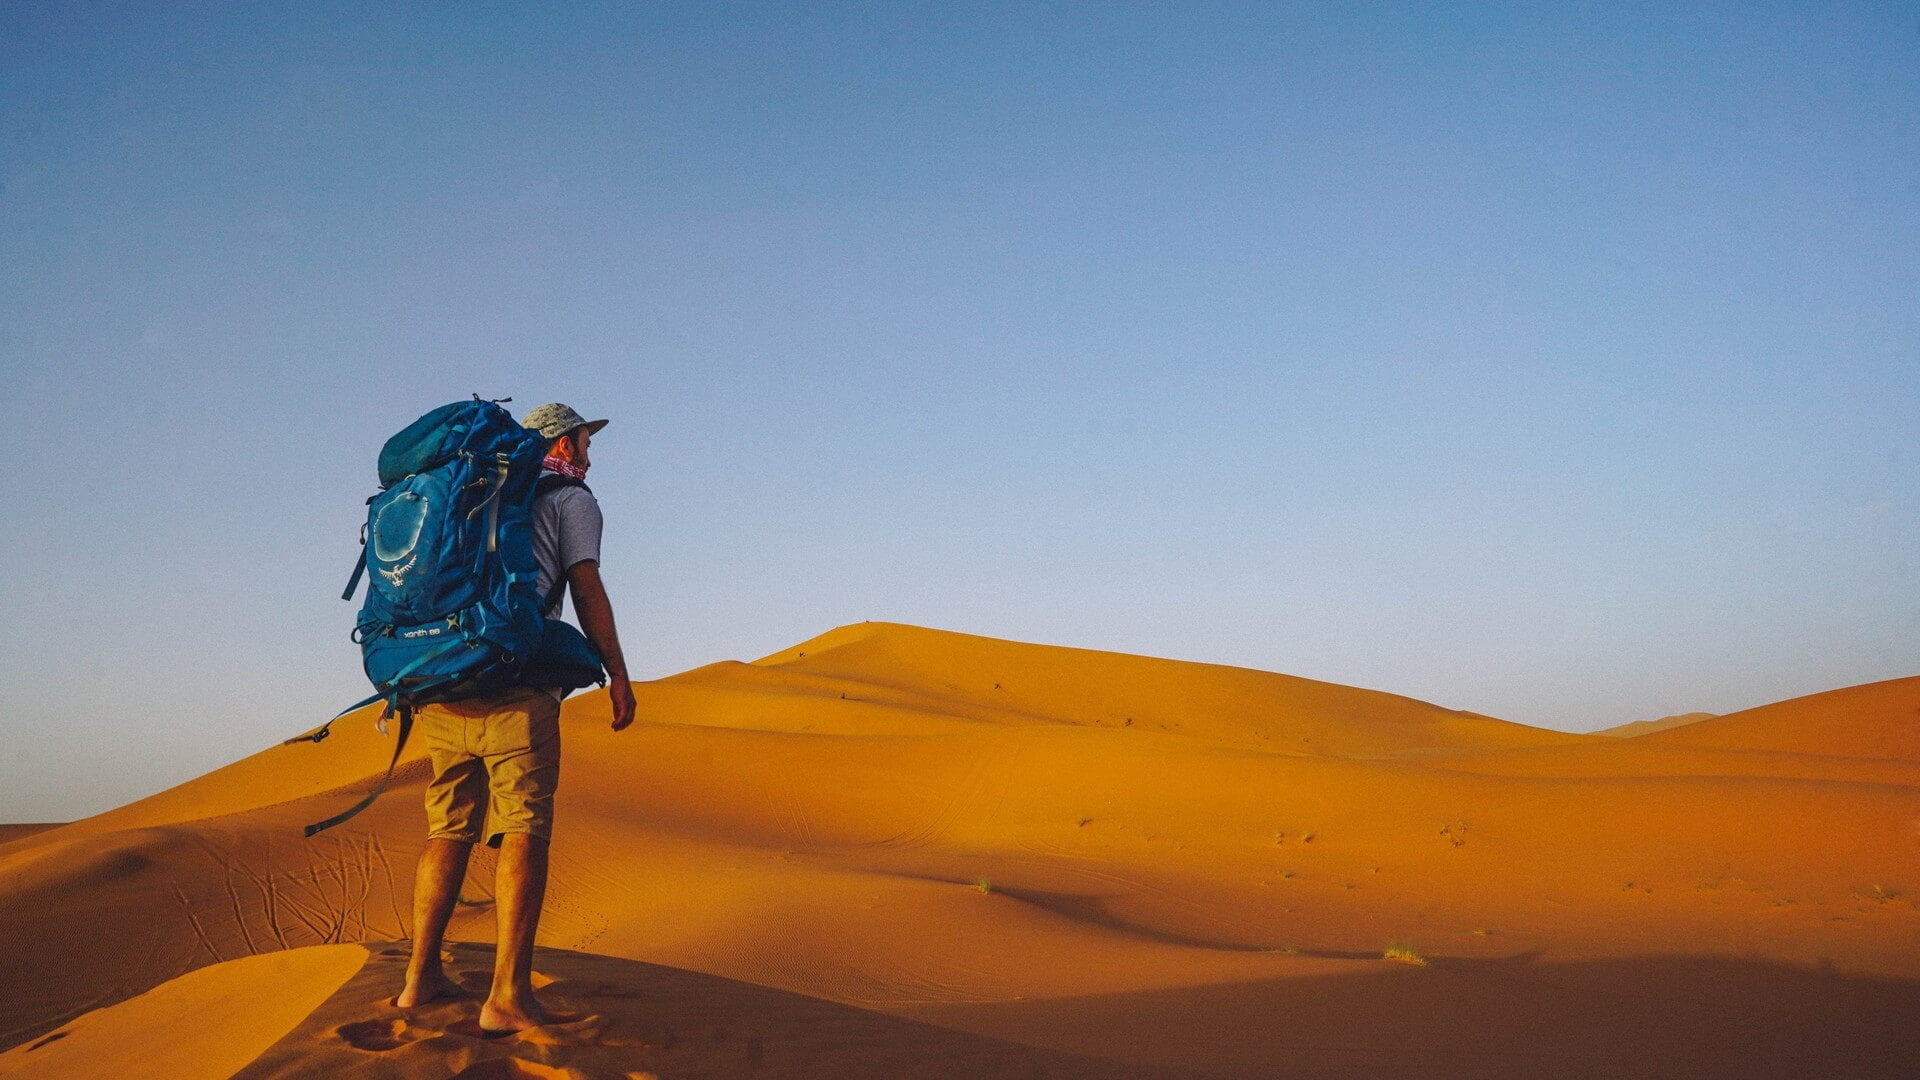 Discover the many benefits of solo travel, including increased confidence, cultural immersion, flexibility, personal growth and new connections.